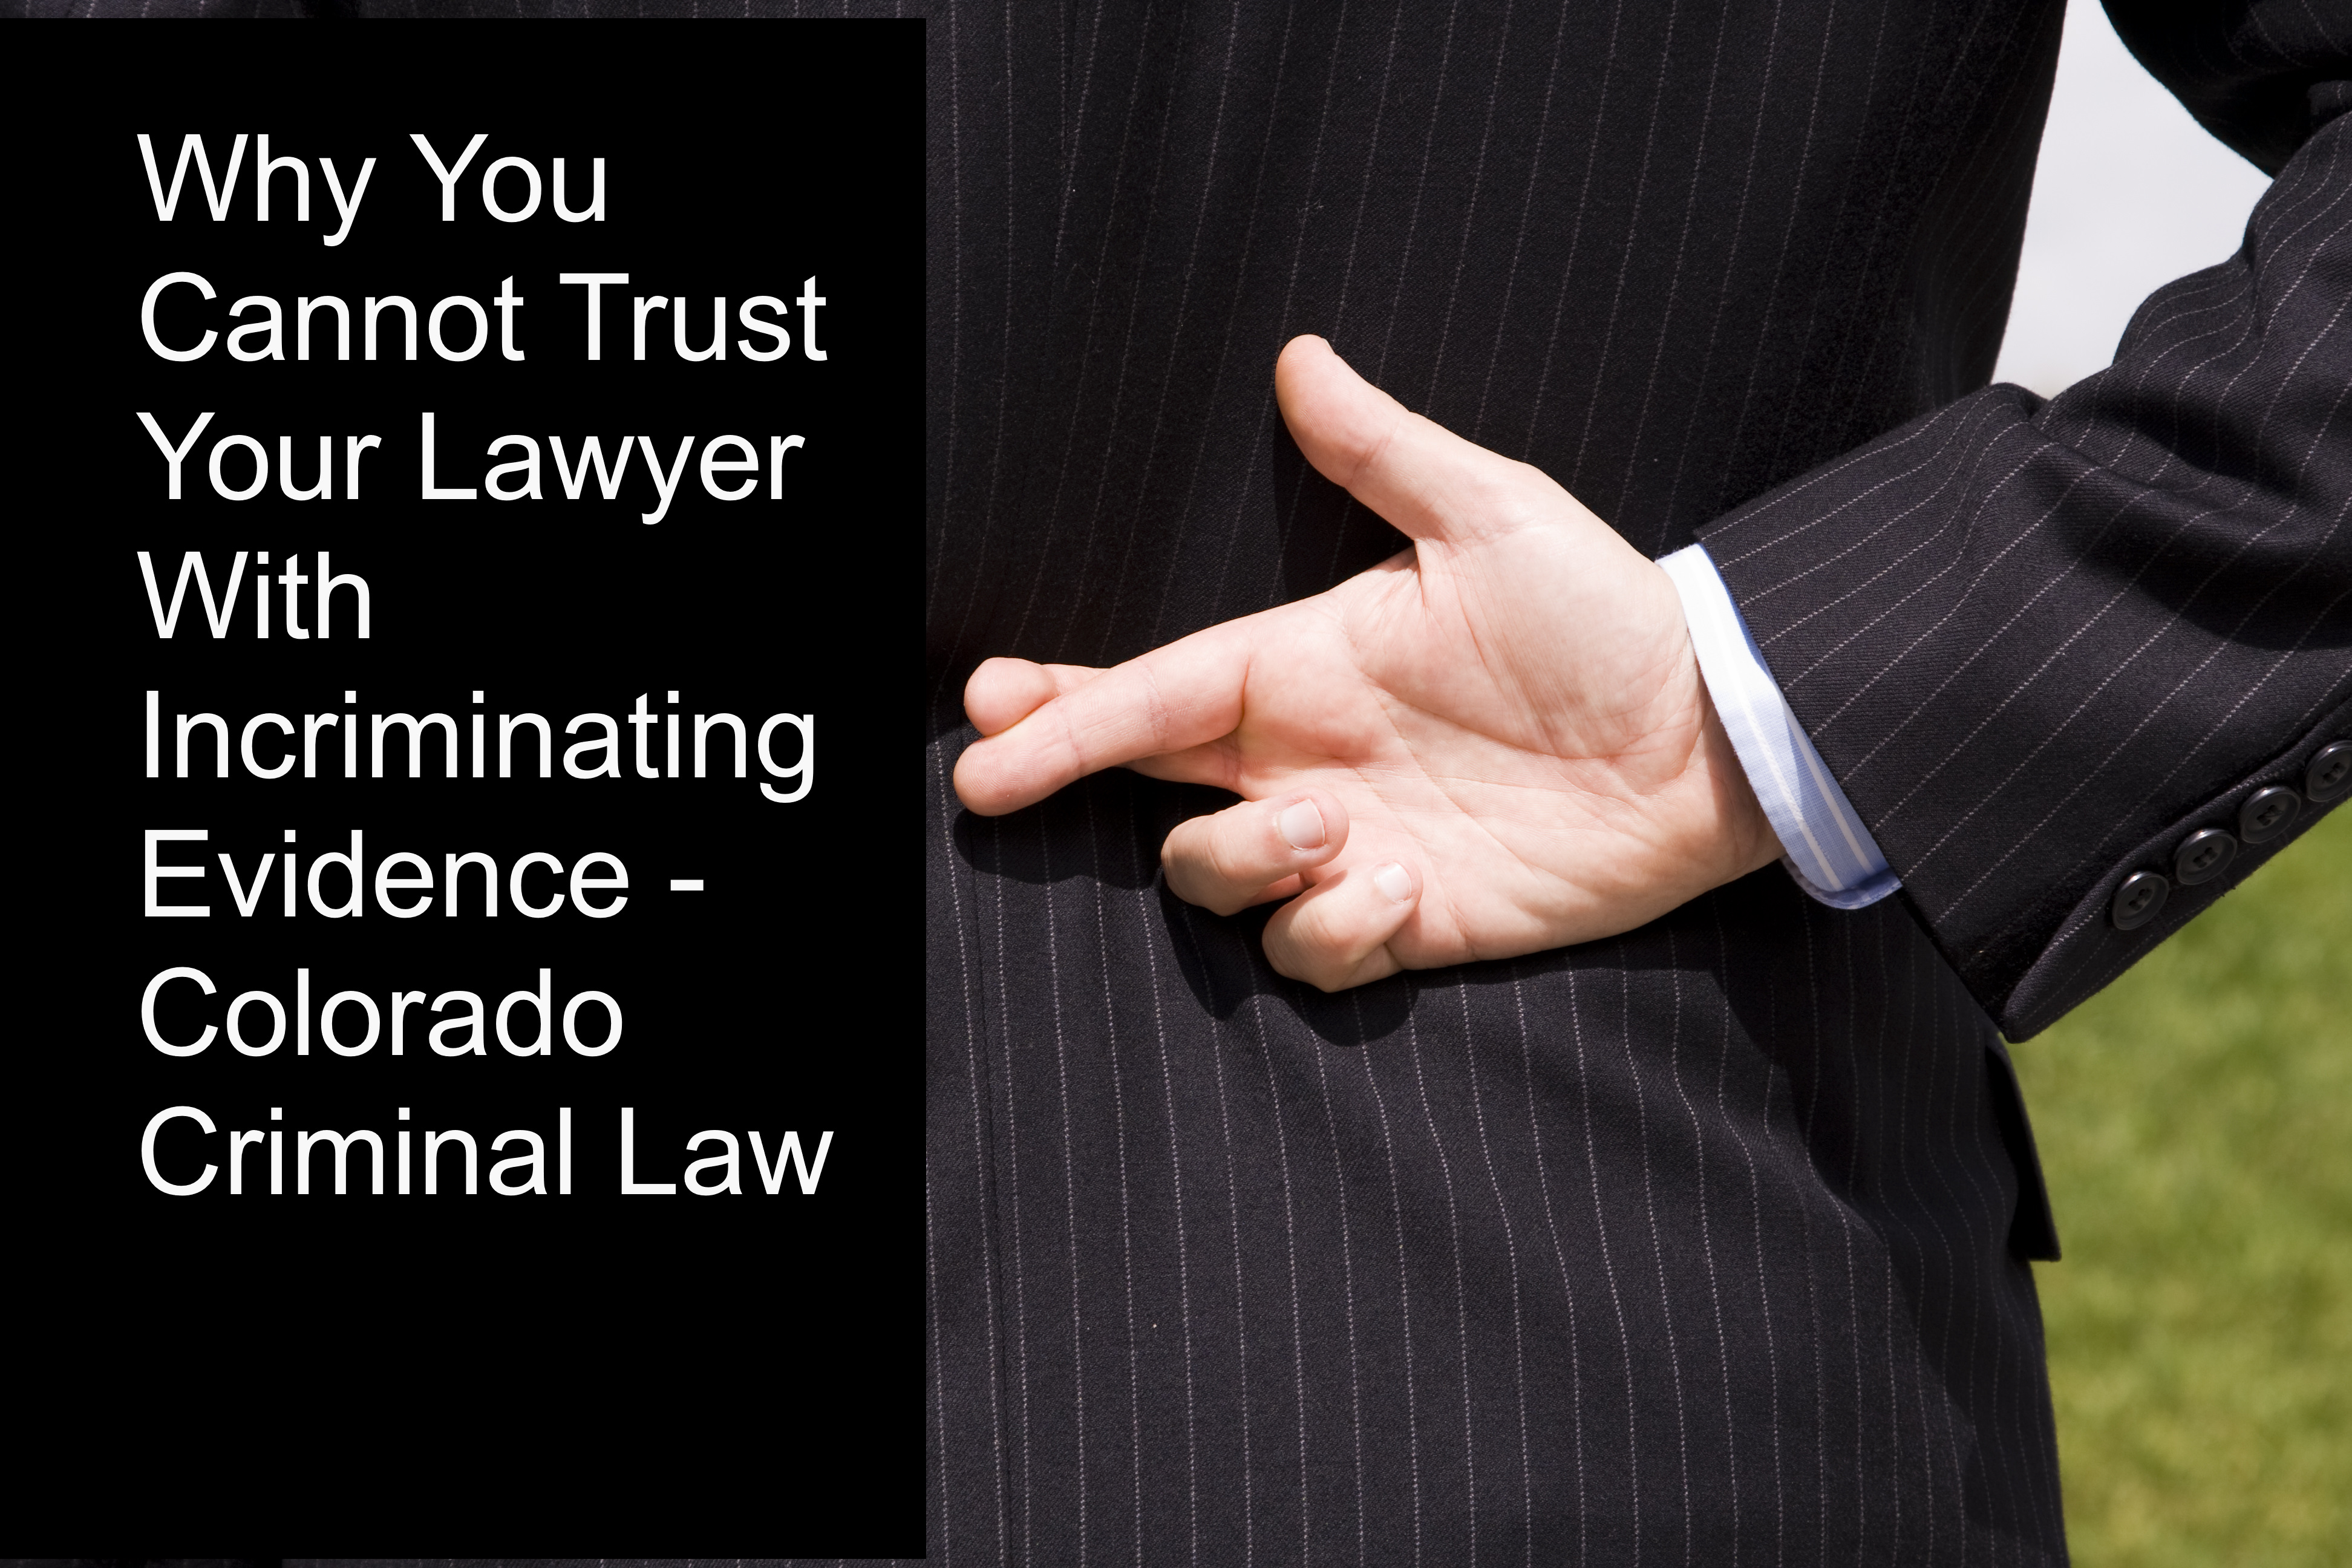 Why You Cannot Trust Your Lawyer With Incriminating Evidence - Colorado Criminal Law